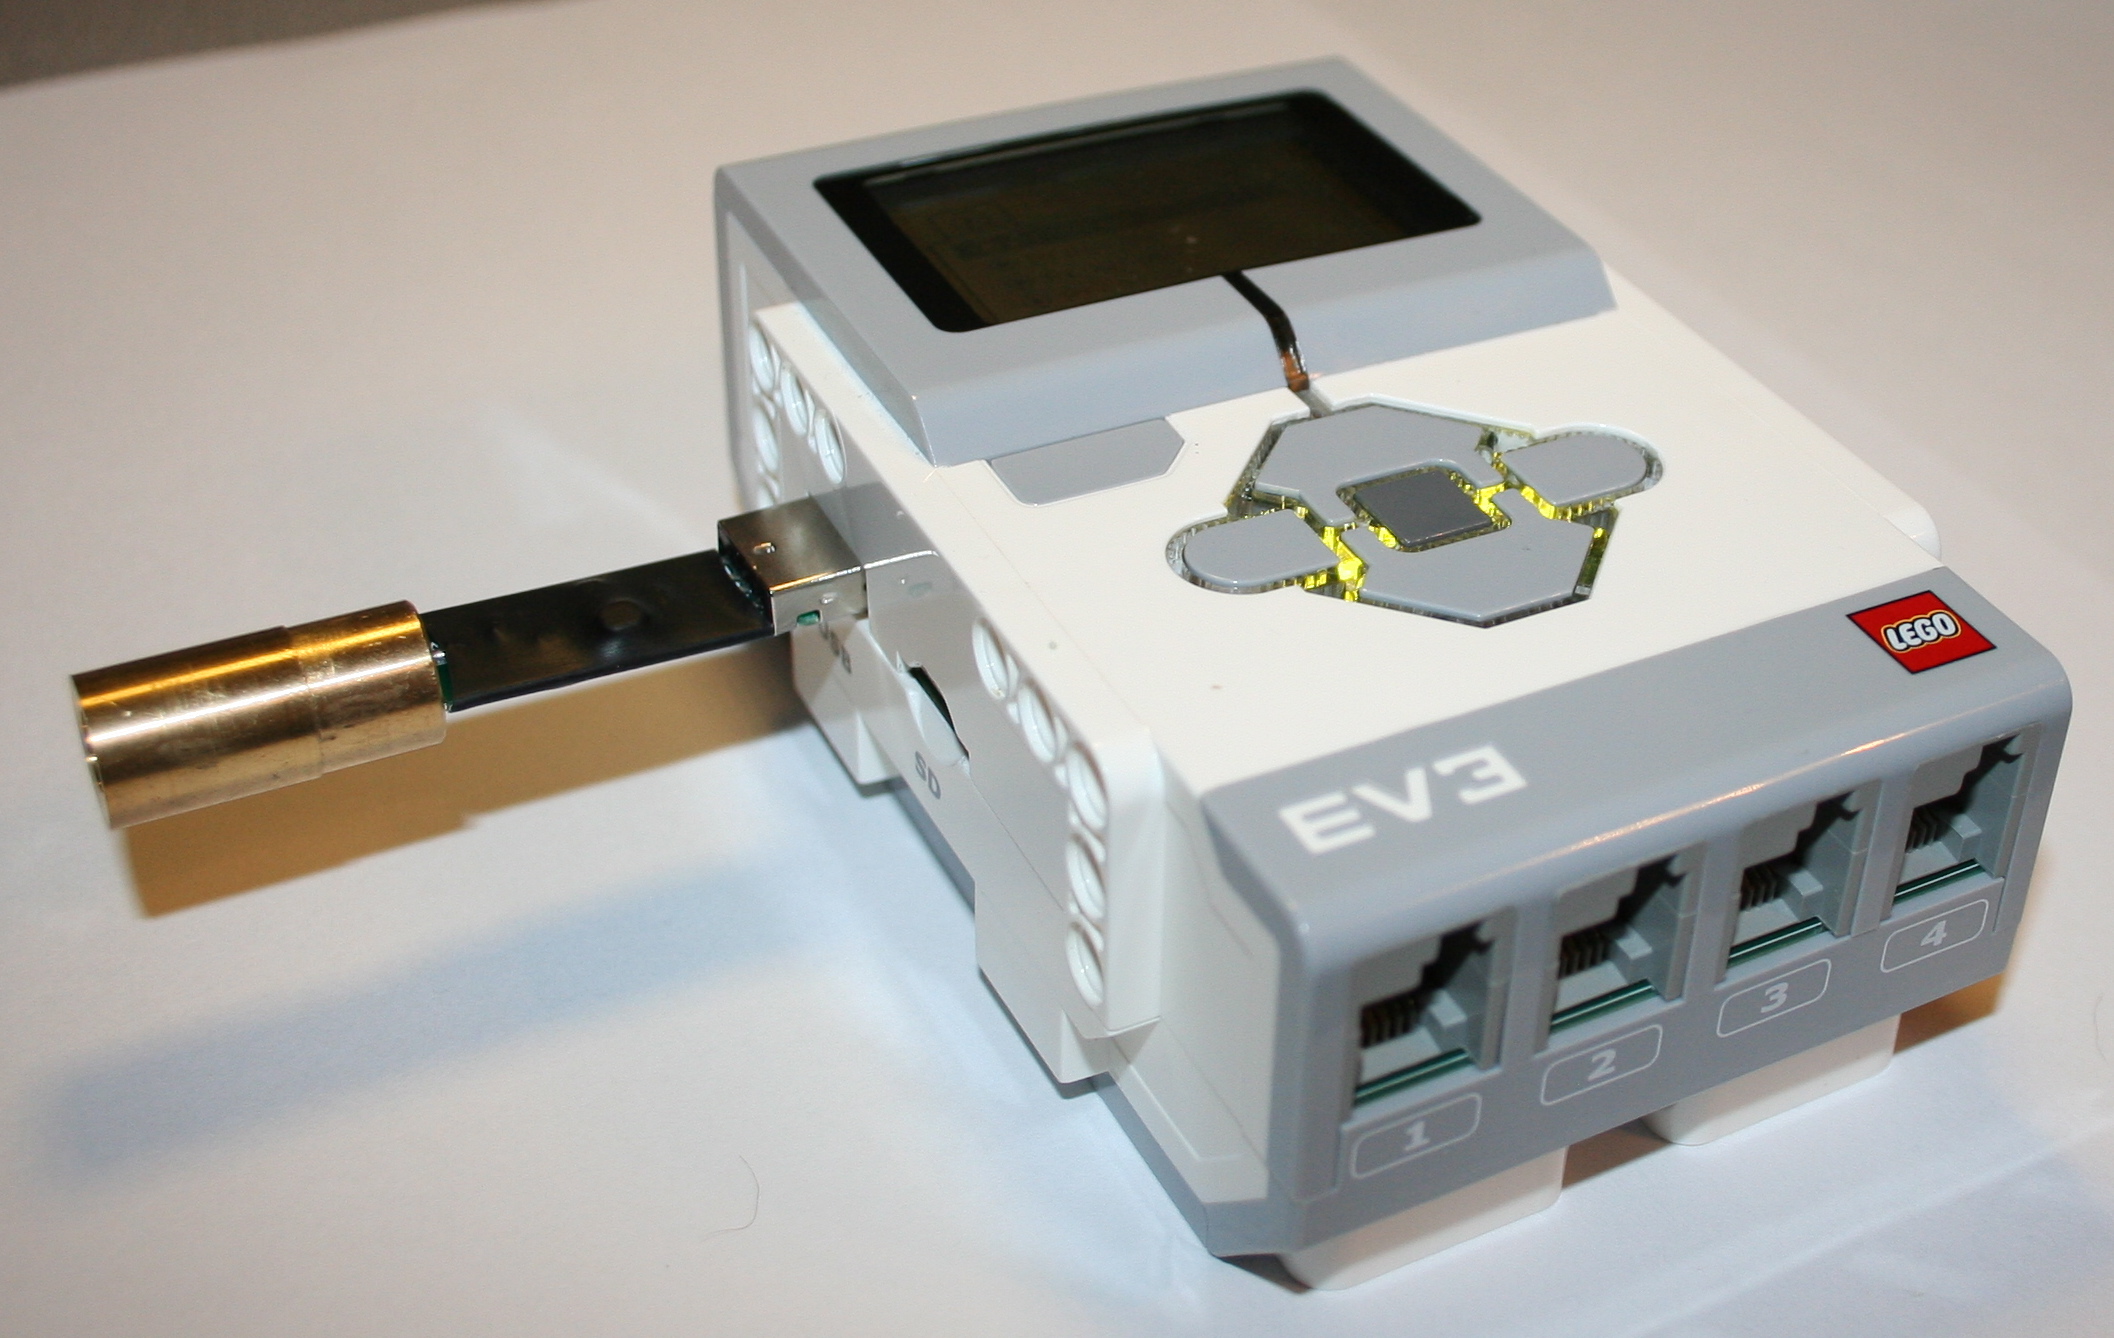 A diode laser module with a USB power connection.